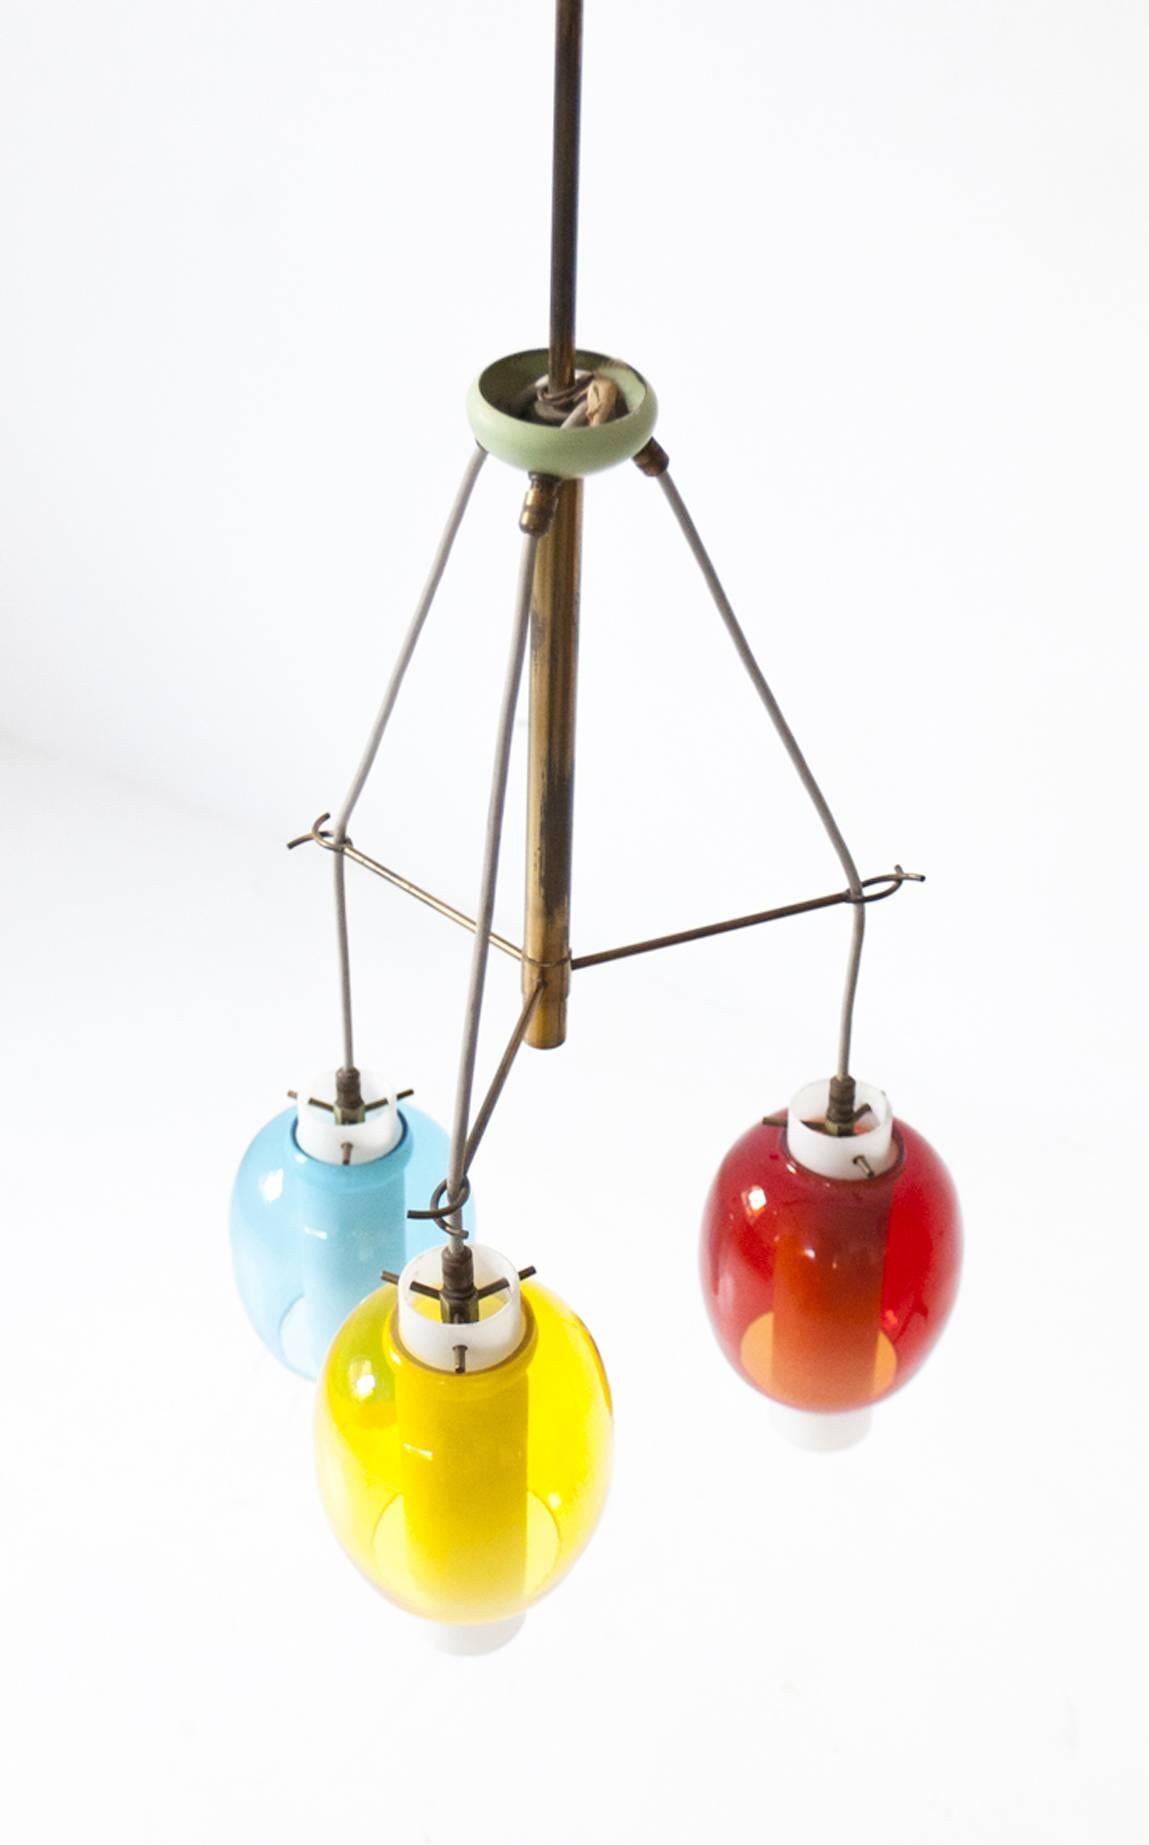 Mid-20th Century Italian Midcentury Modern Brass and Colored Glass Chandelier, 1950s